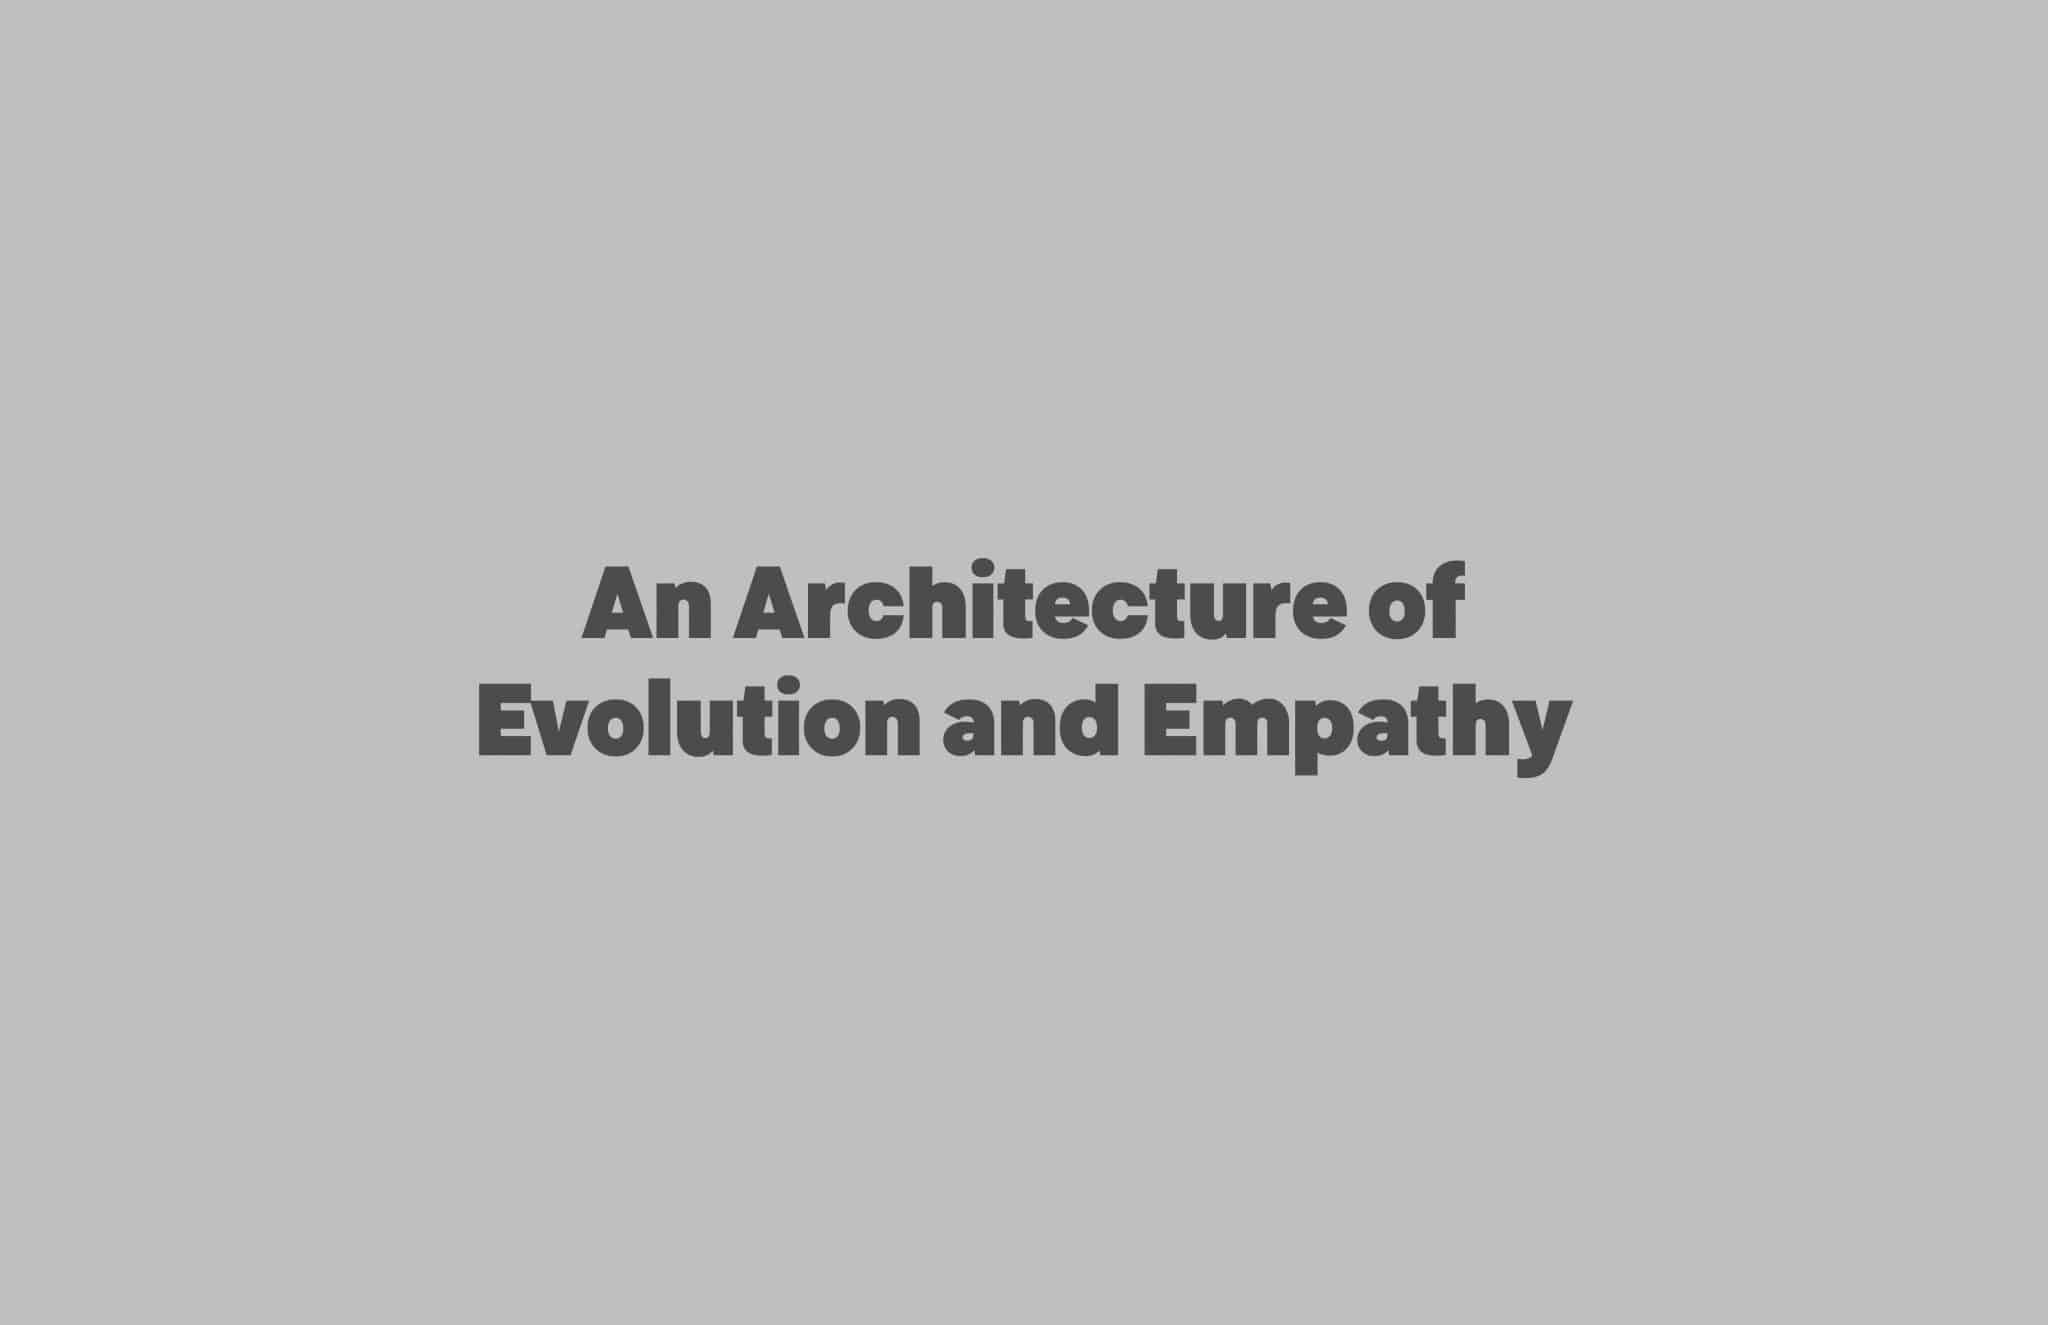   An Architecture of Evolution and Empathy , Seanna Guillemin, University of Calgary 